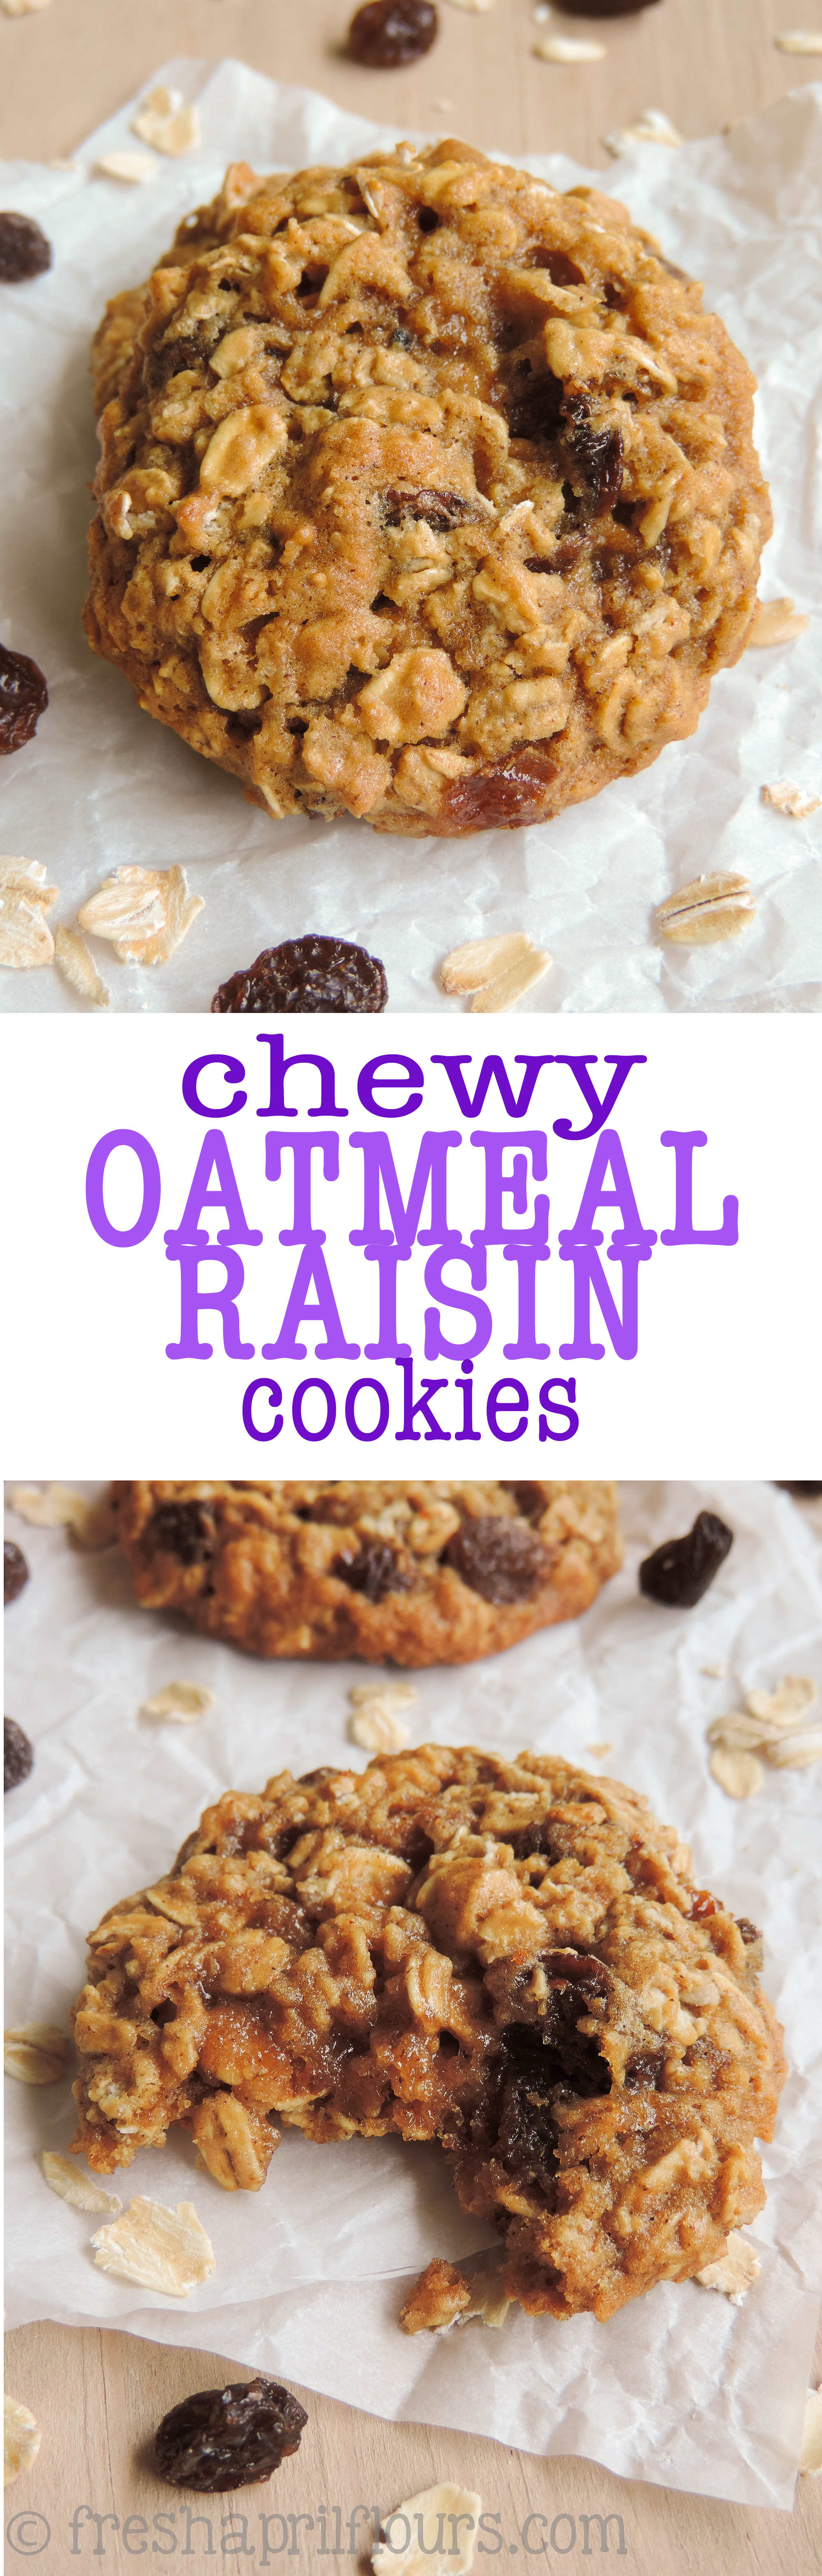 Best Chewy Oatmeal Cookies
 chewy oatmeal raisin cookies with molasses